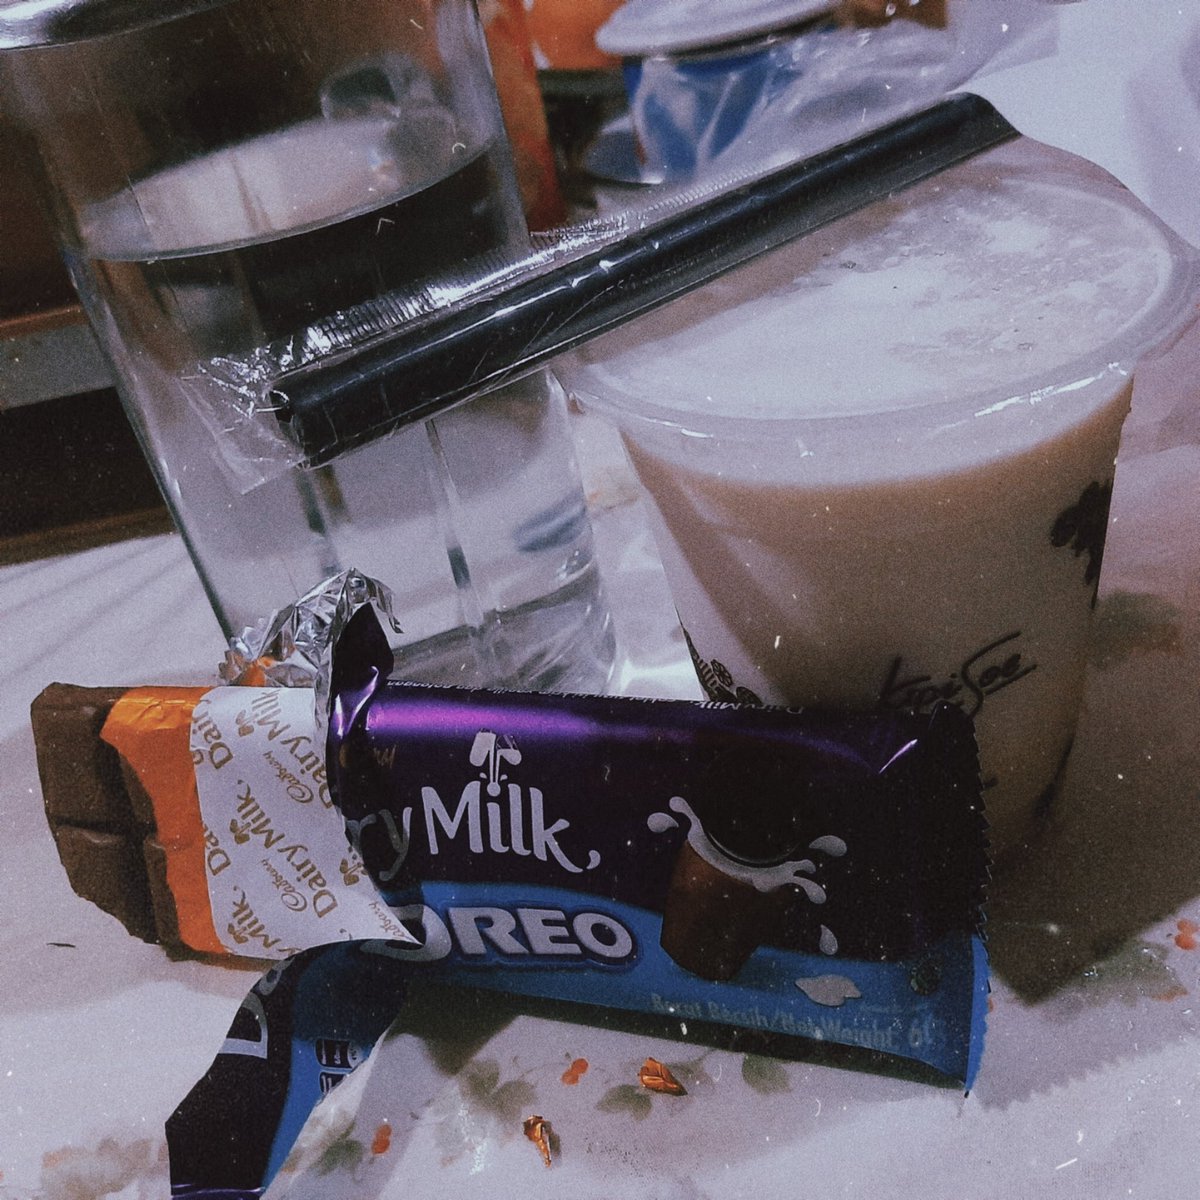 DAY #1"ㅡ 24/04 06:06 PMmy breakㅡfasting meal♡ @DairyMilkIn chocolate bar, milk boba and of course mineral waterthey said, "break it with sweets" 